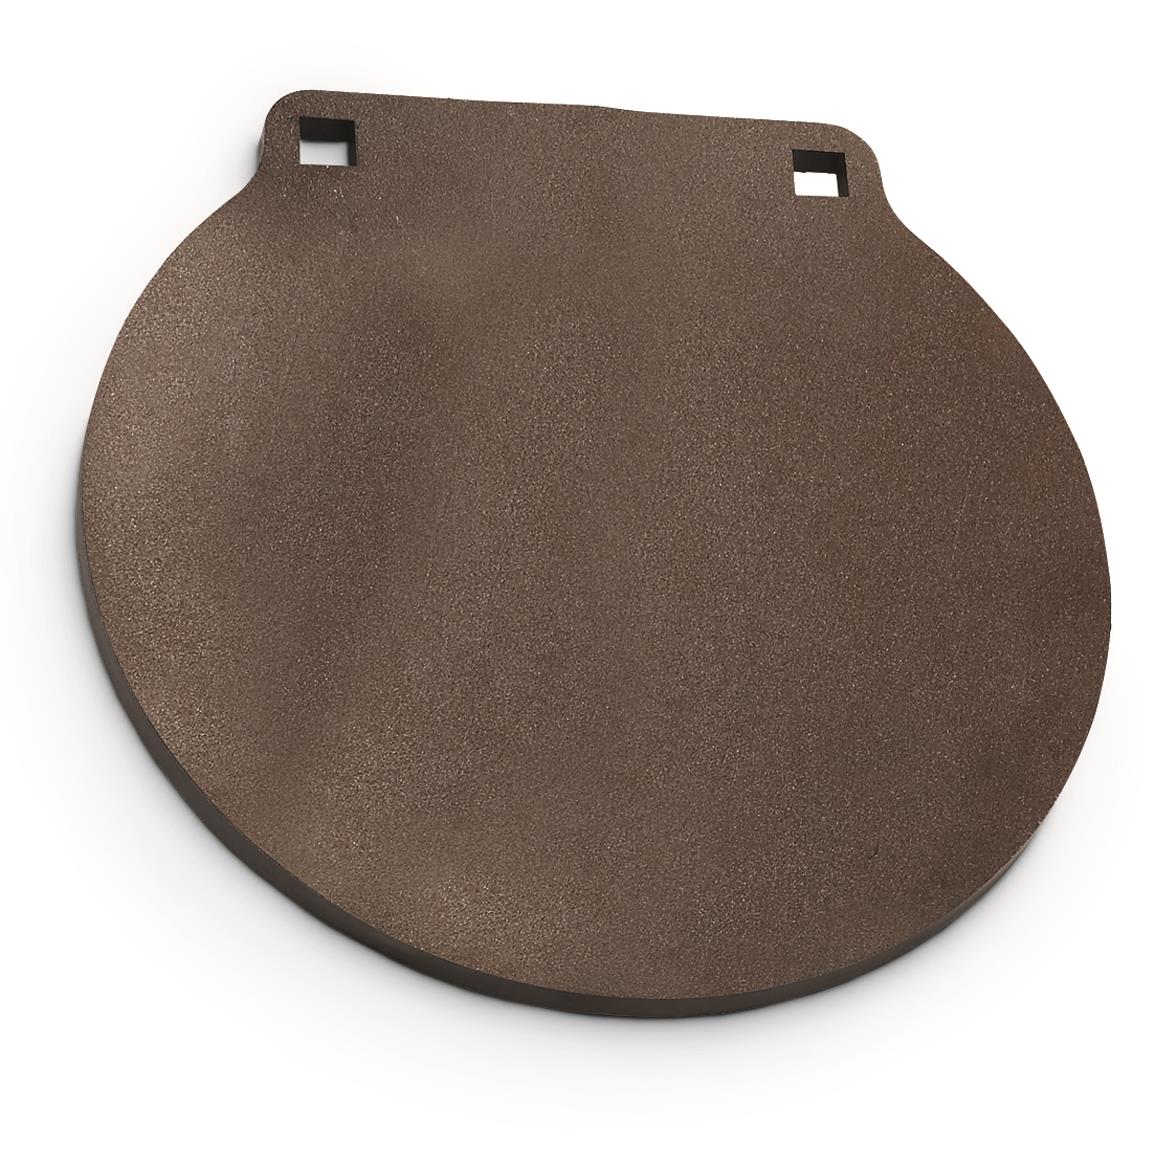 CTS AR500 Hardened Steel Gong Shooting Target, 1/2" Thick